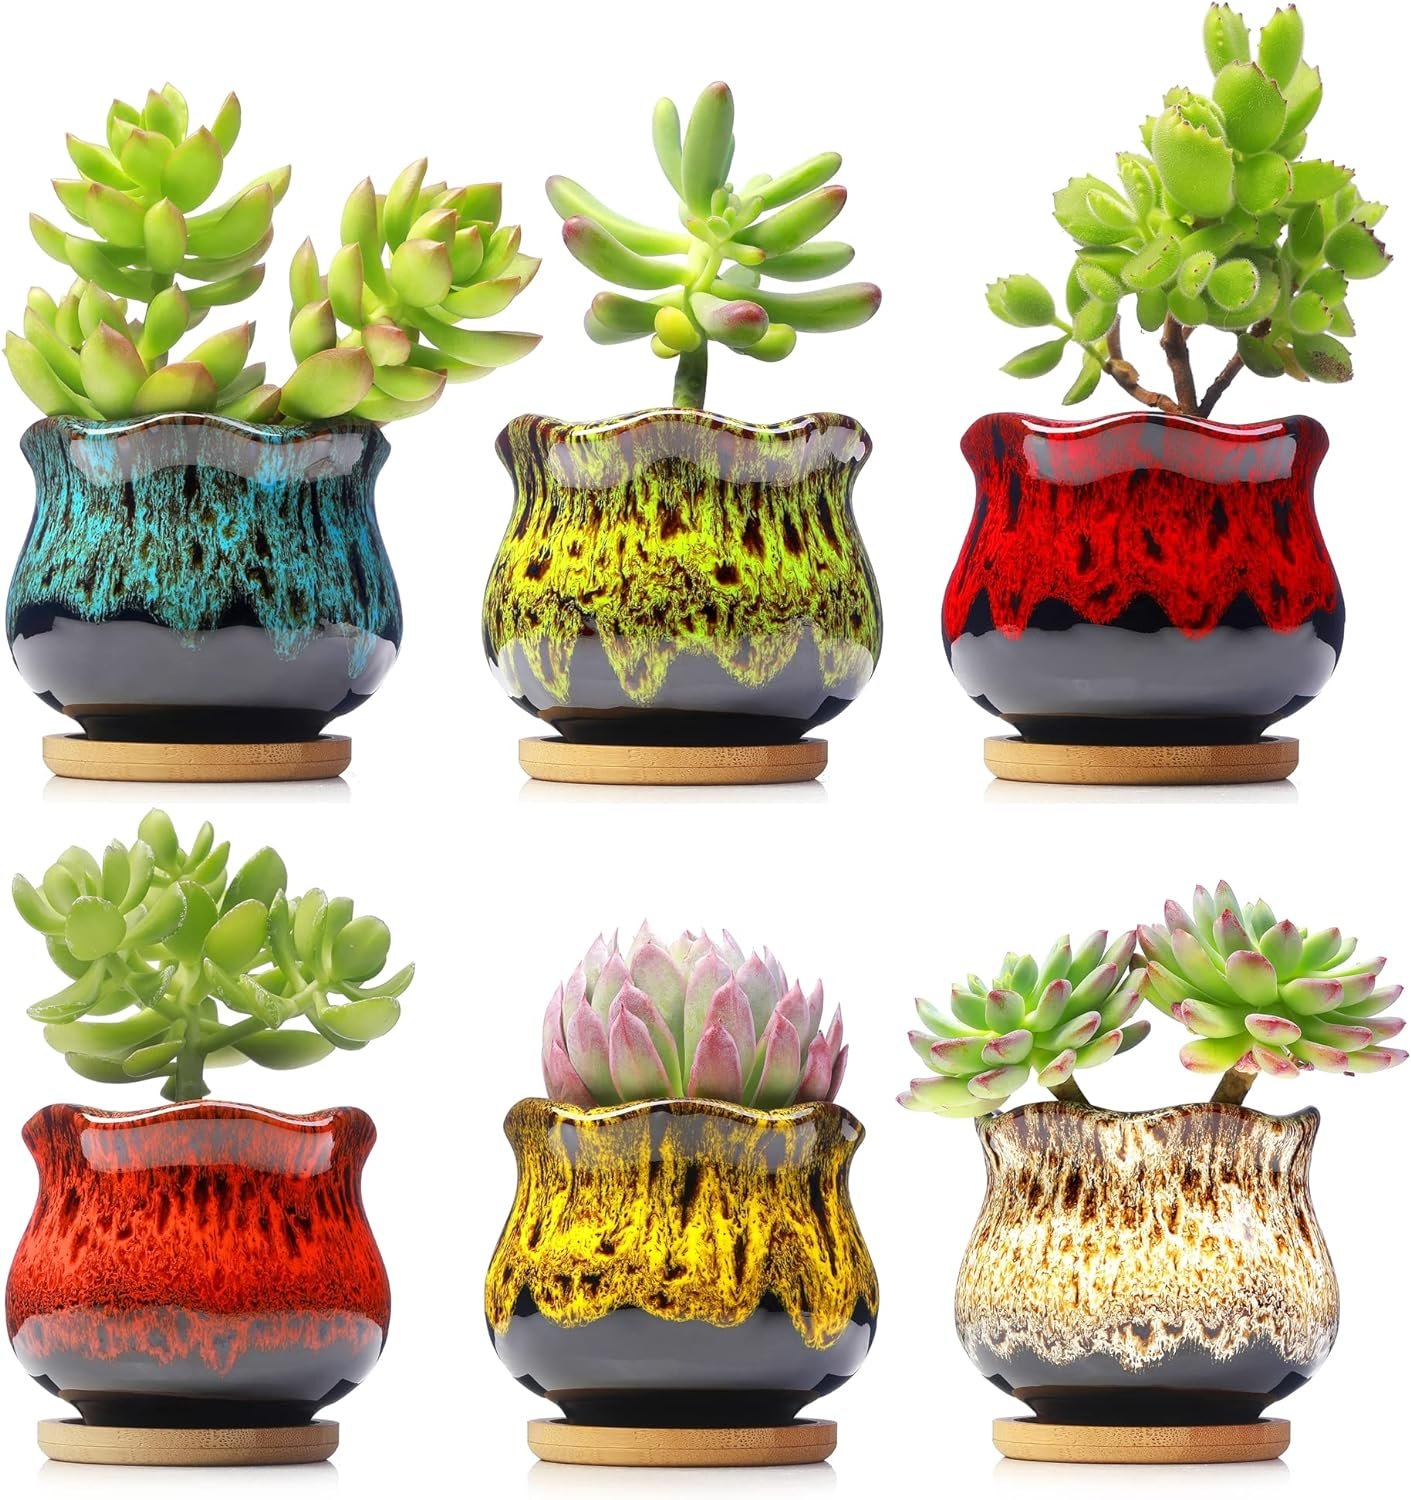 Fulloog Cute Ceramic Succulent Planters, Garden Pots with Drainage and Attached Saucer, Set of 6 - Plants Not Included